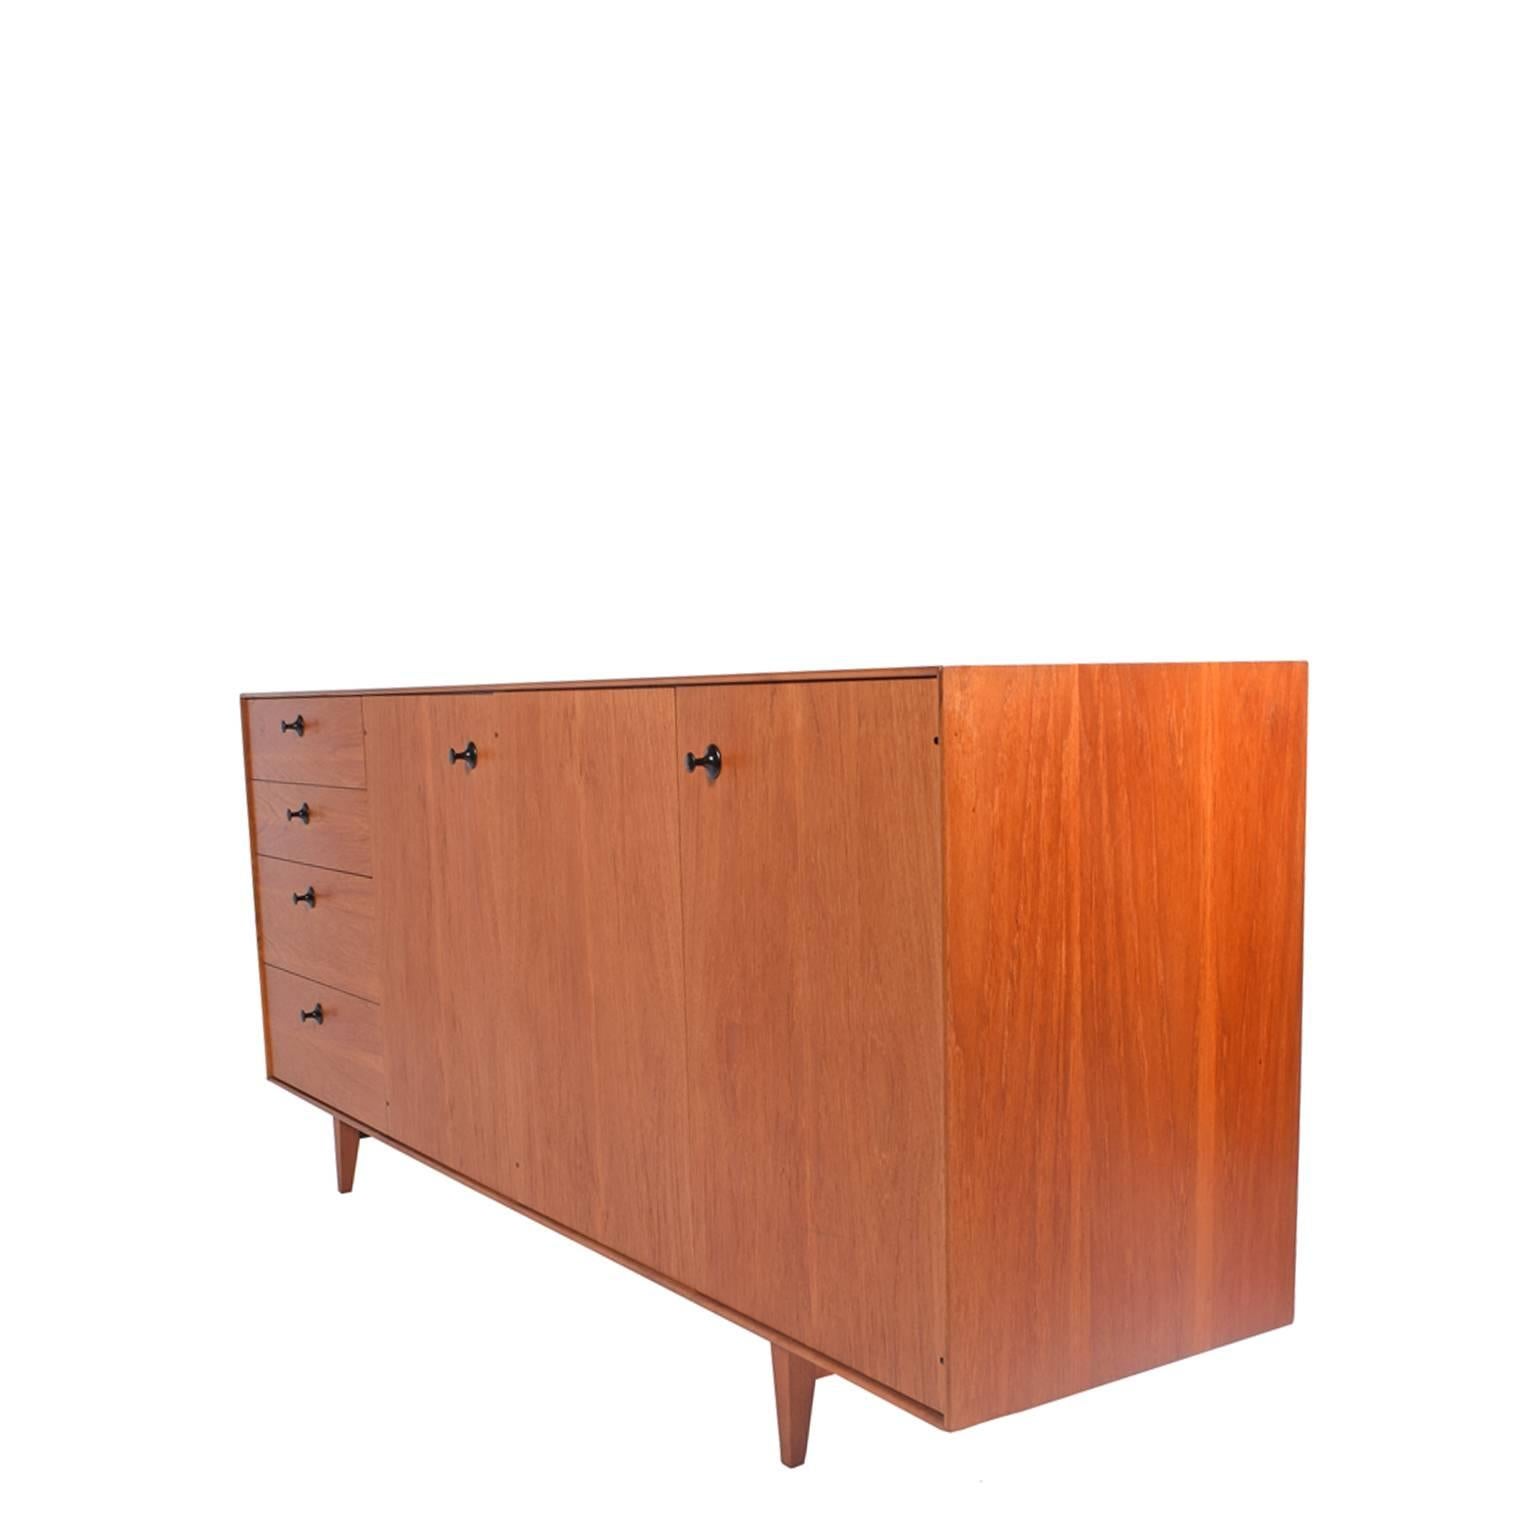 American Teak Thin Edge Cabinet by George Nelson and Associates for Herman Miller